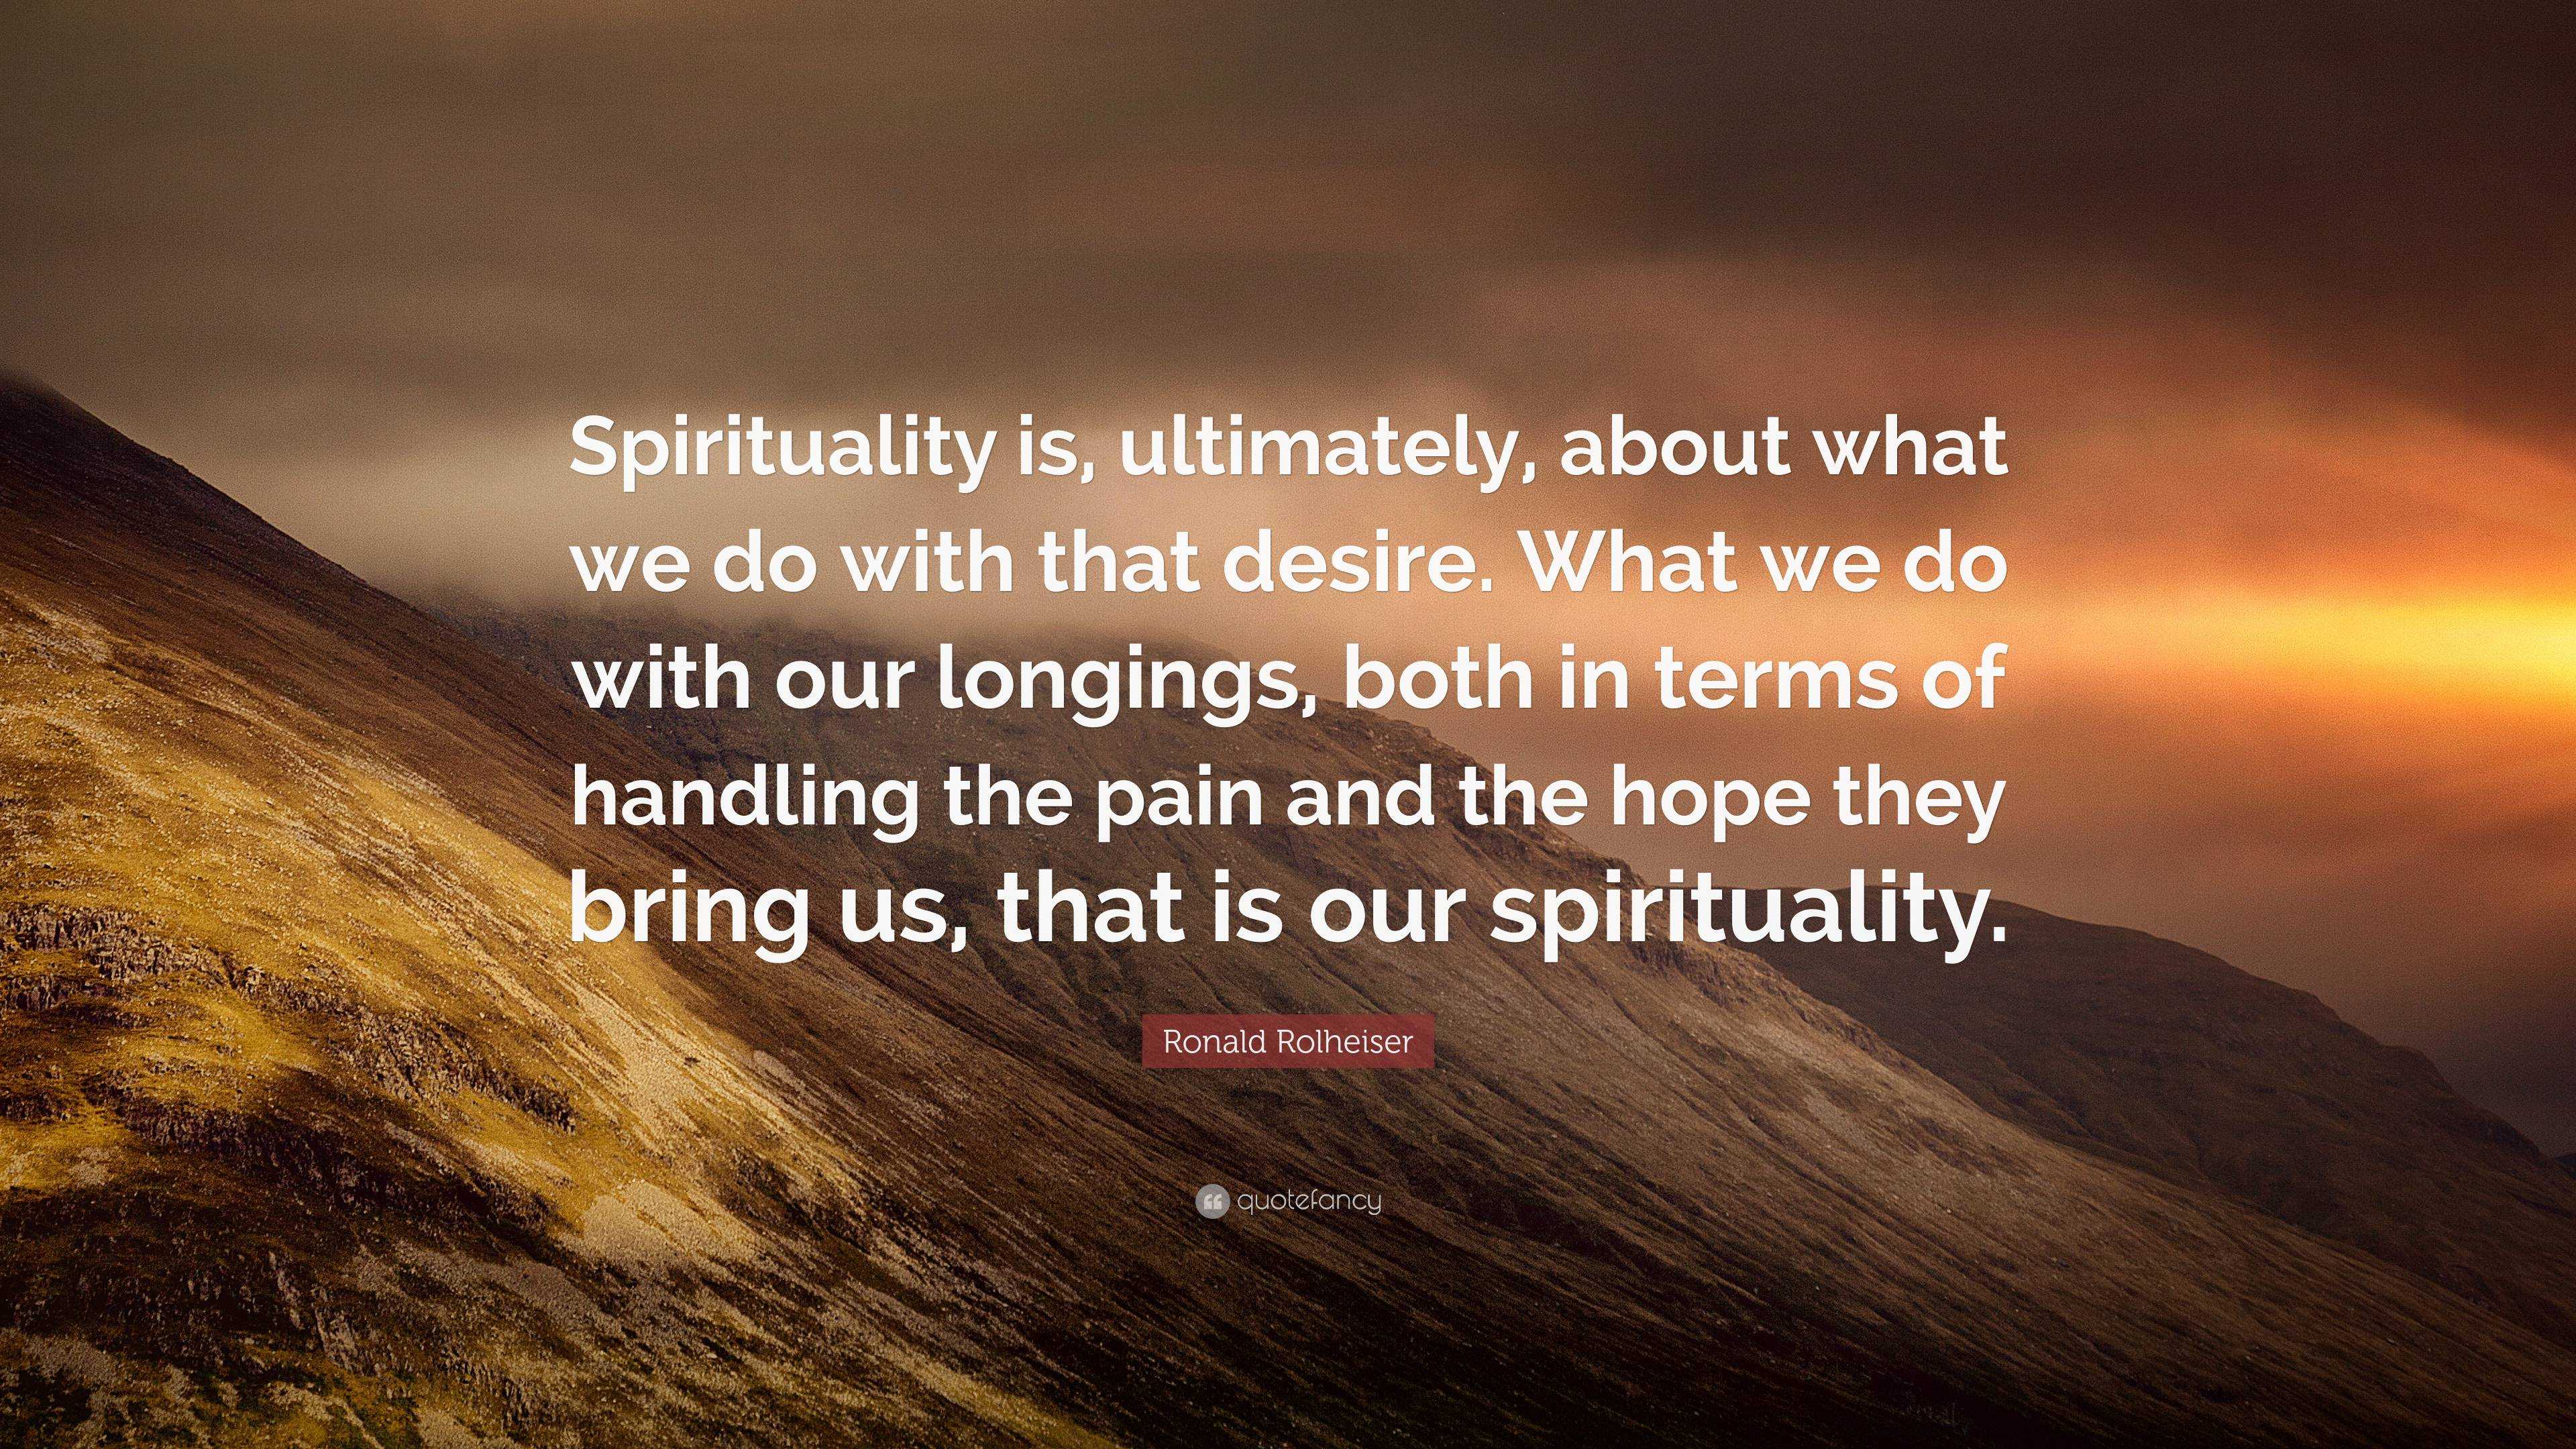 Ronald Rolheiser Quote: “Spirituality is, ultimately, about what we do ...